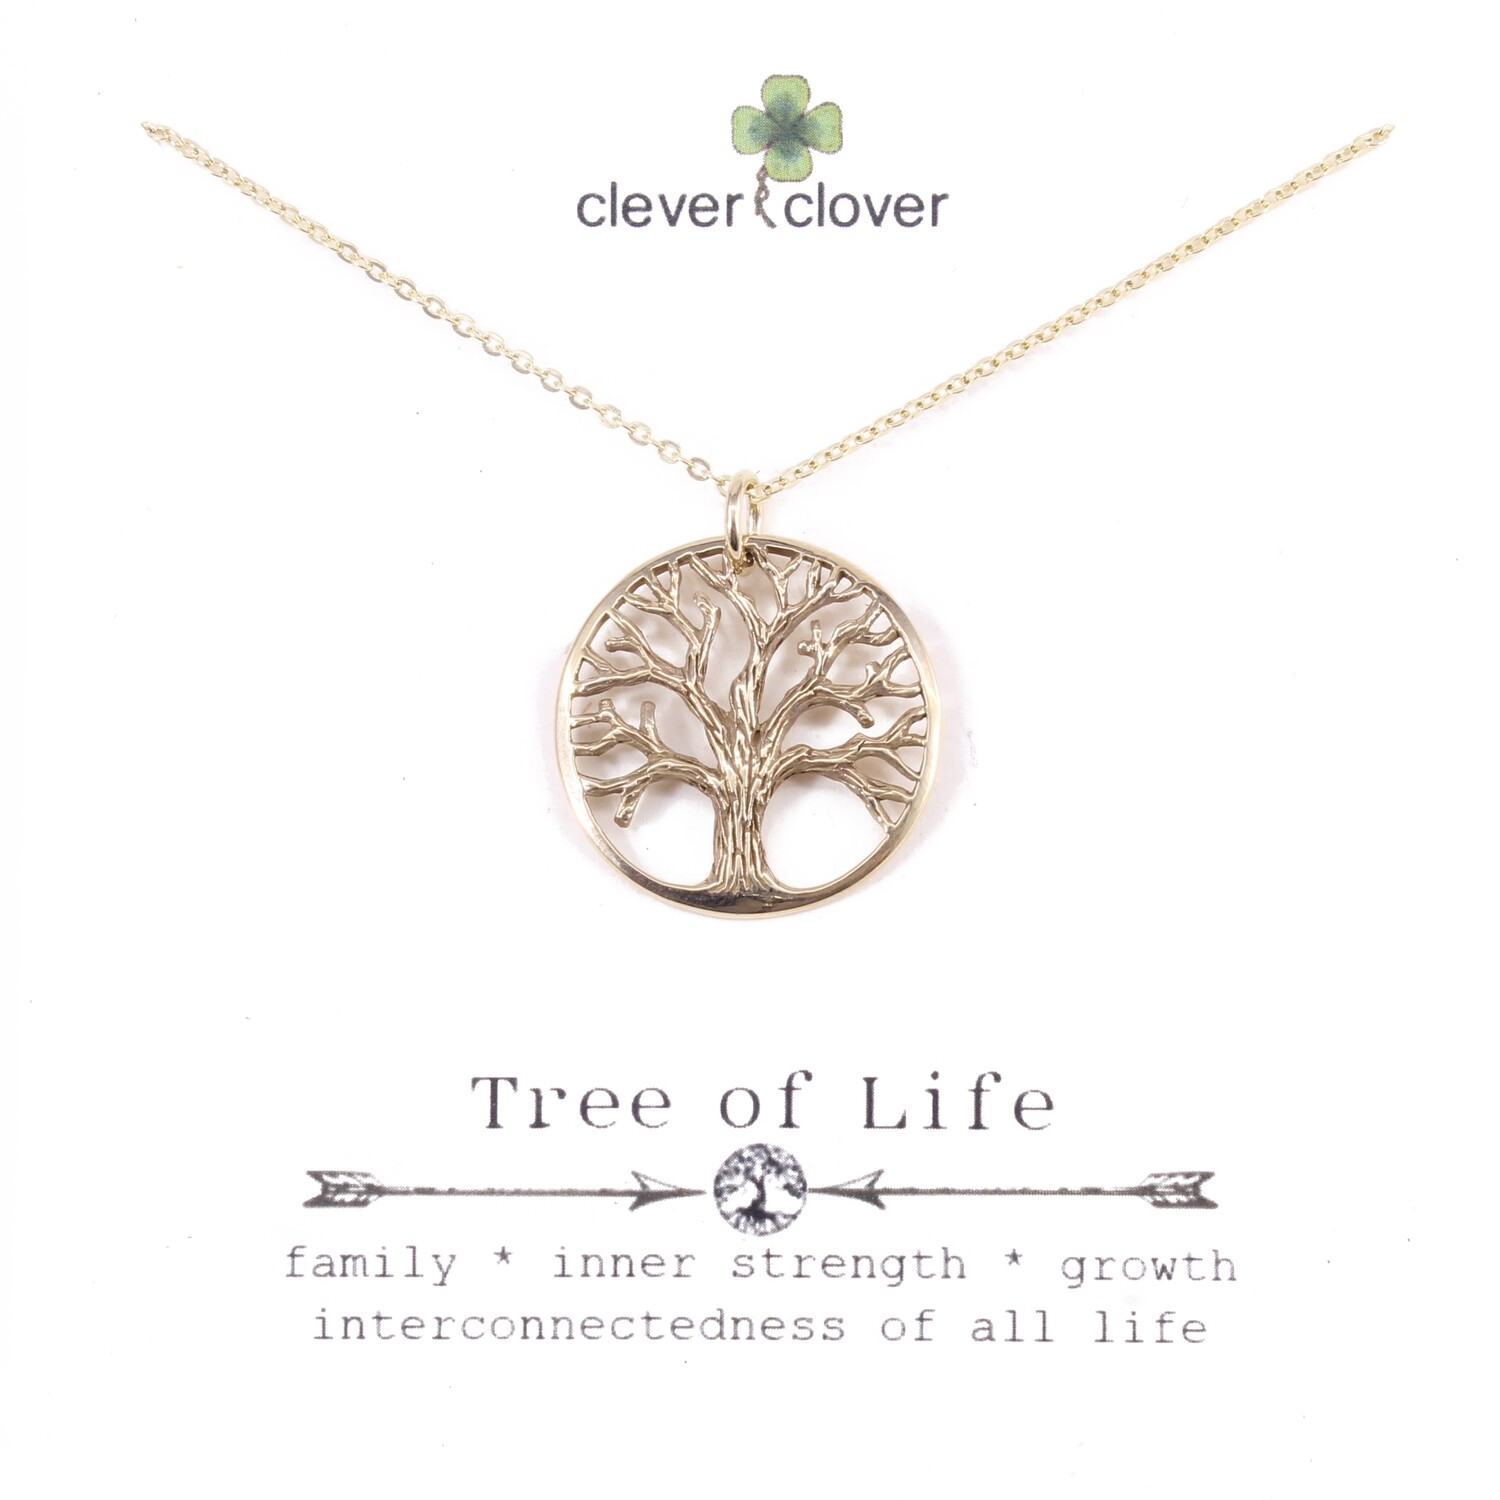 CCN734 Bronze Large Textured Tree of Life Necklace